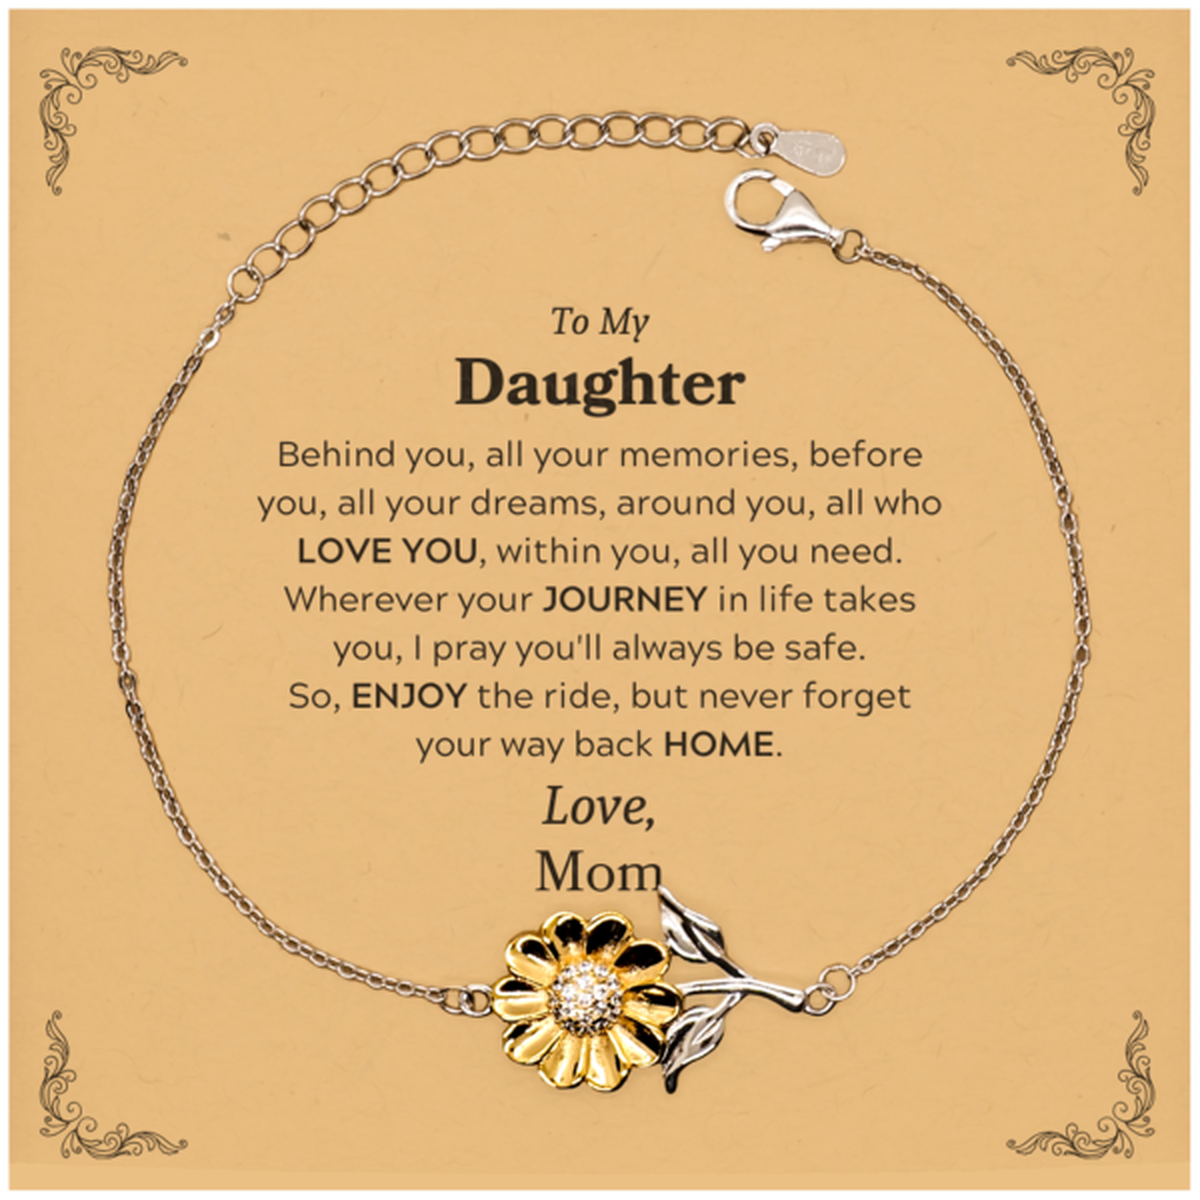 To My Daughter Graduation Gifts from Mom, Daughter Sunflower Bracelet Christmas Birthday Gifts for Daughter Behind you, all your memories, before you, all your dreams. Love, Mom